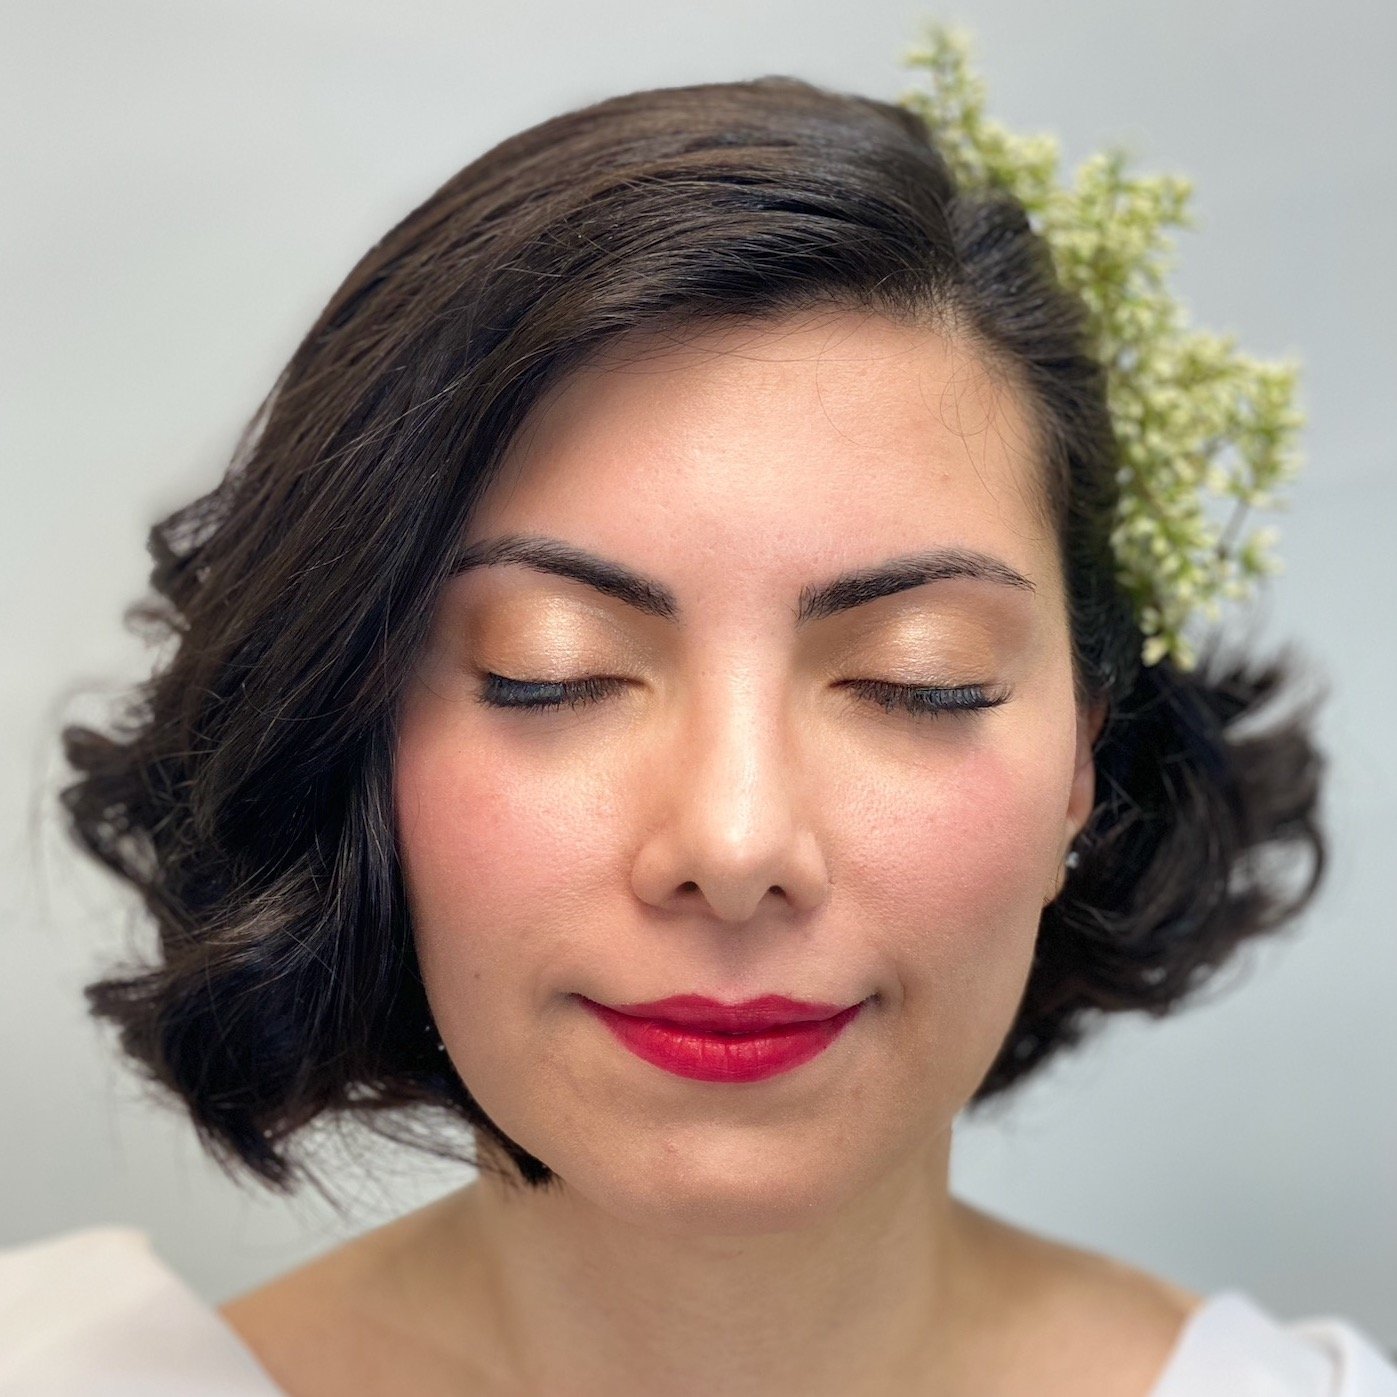 Natural bob wedding hairstyle with hair accessory. Fresh and radiant bridal makeup with a red lip, SF City Hall 